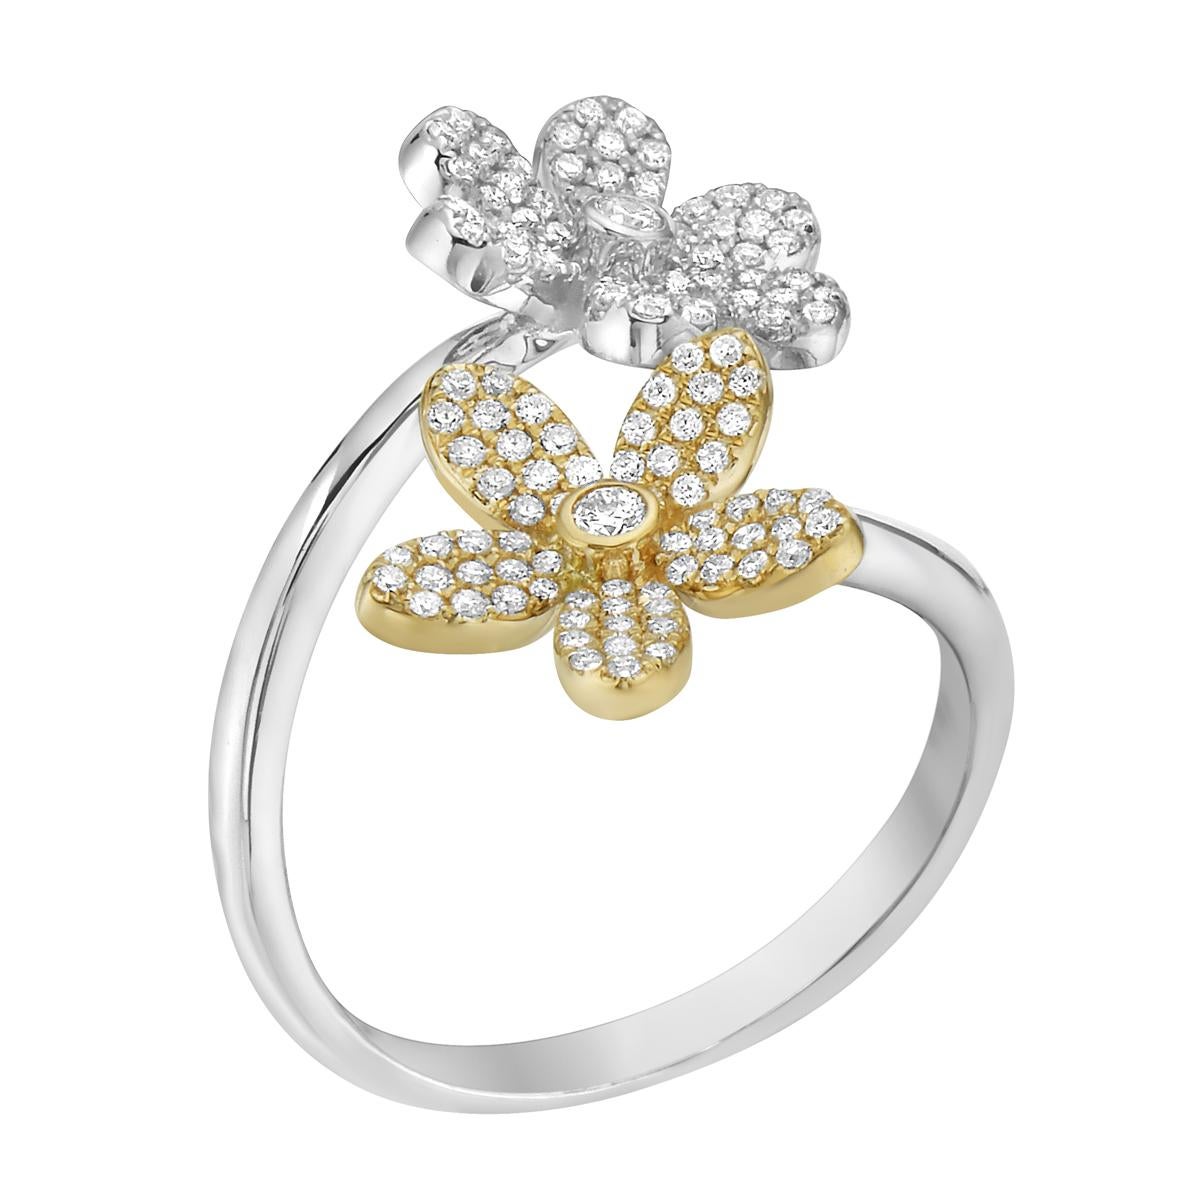 With this exquisite double flower wrap-around diamond ring, style and glamour are in the spotlight. This 14 karat ring is made from 3.1 grams of gold and is covered in 133 round SI1-SI2, GH color diamonds totaling 0.50ct. This ring is size 6.5.